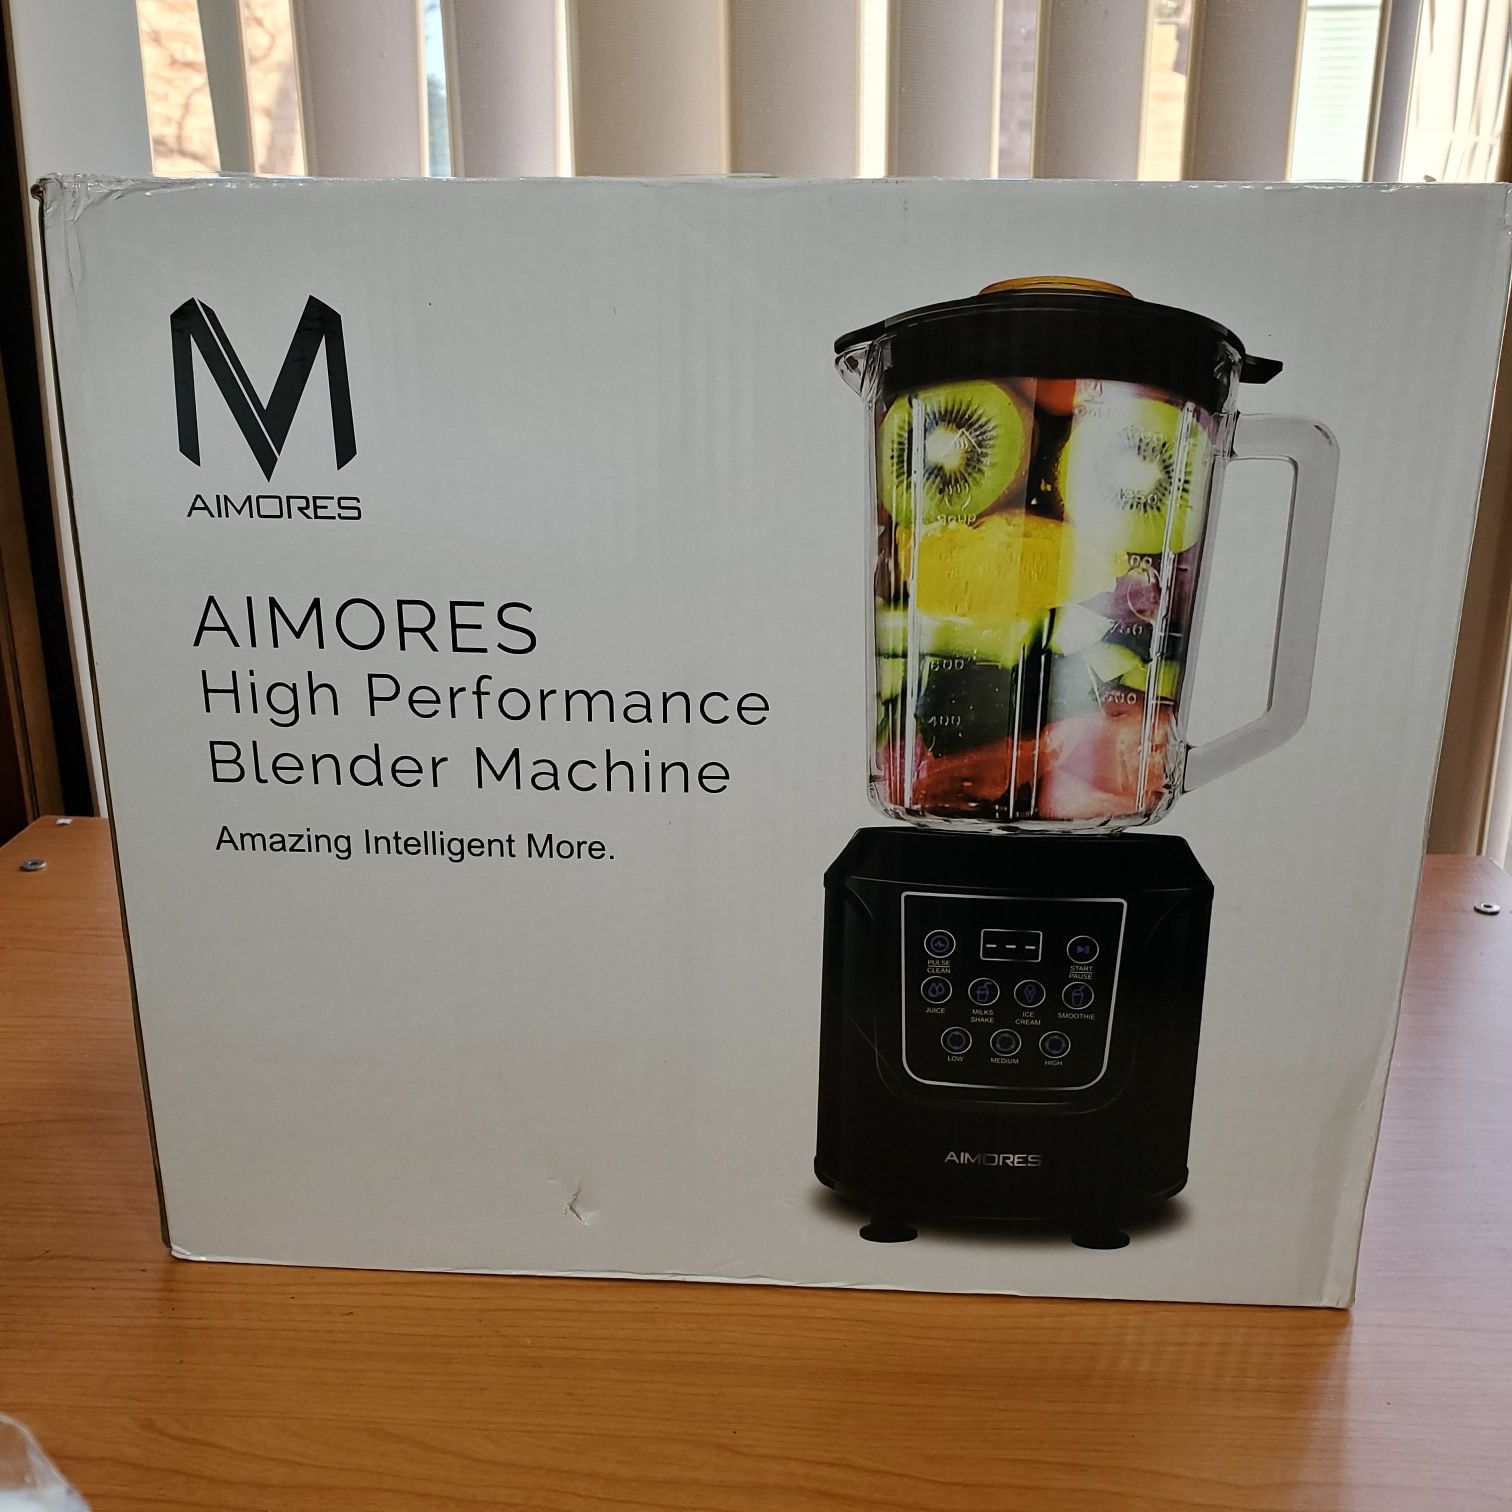 NEW Aimores Pre Programmed LED Display Blender High Perfomance Machine for Smoothies AS-UP1250 Sealed Box